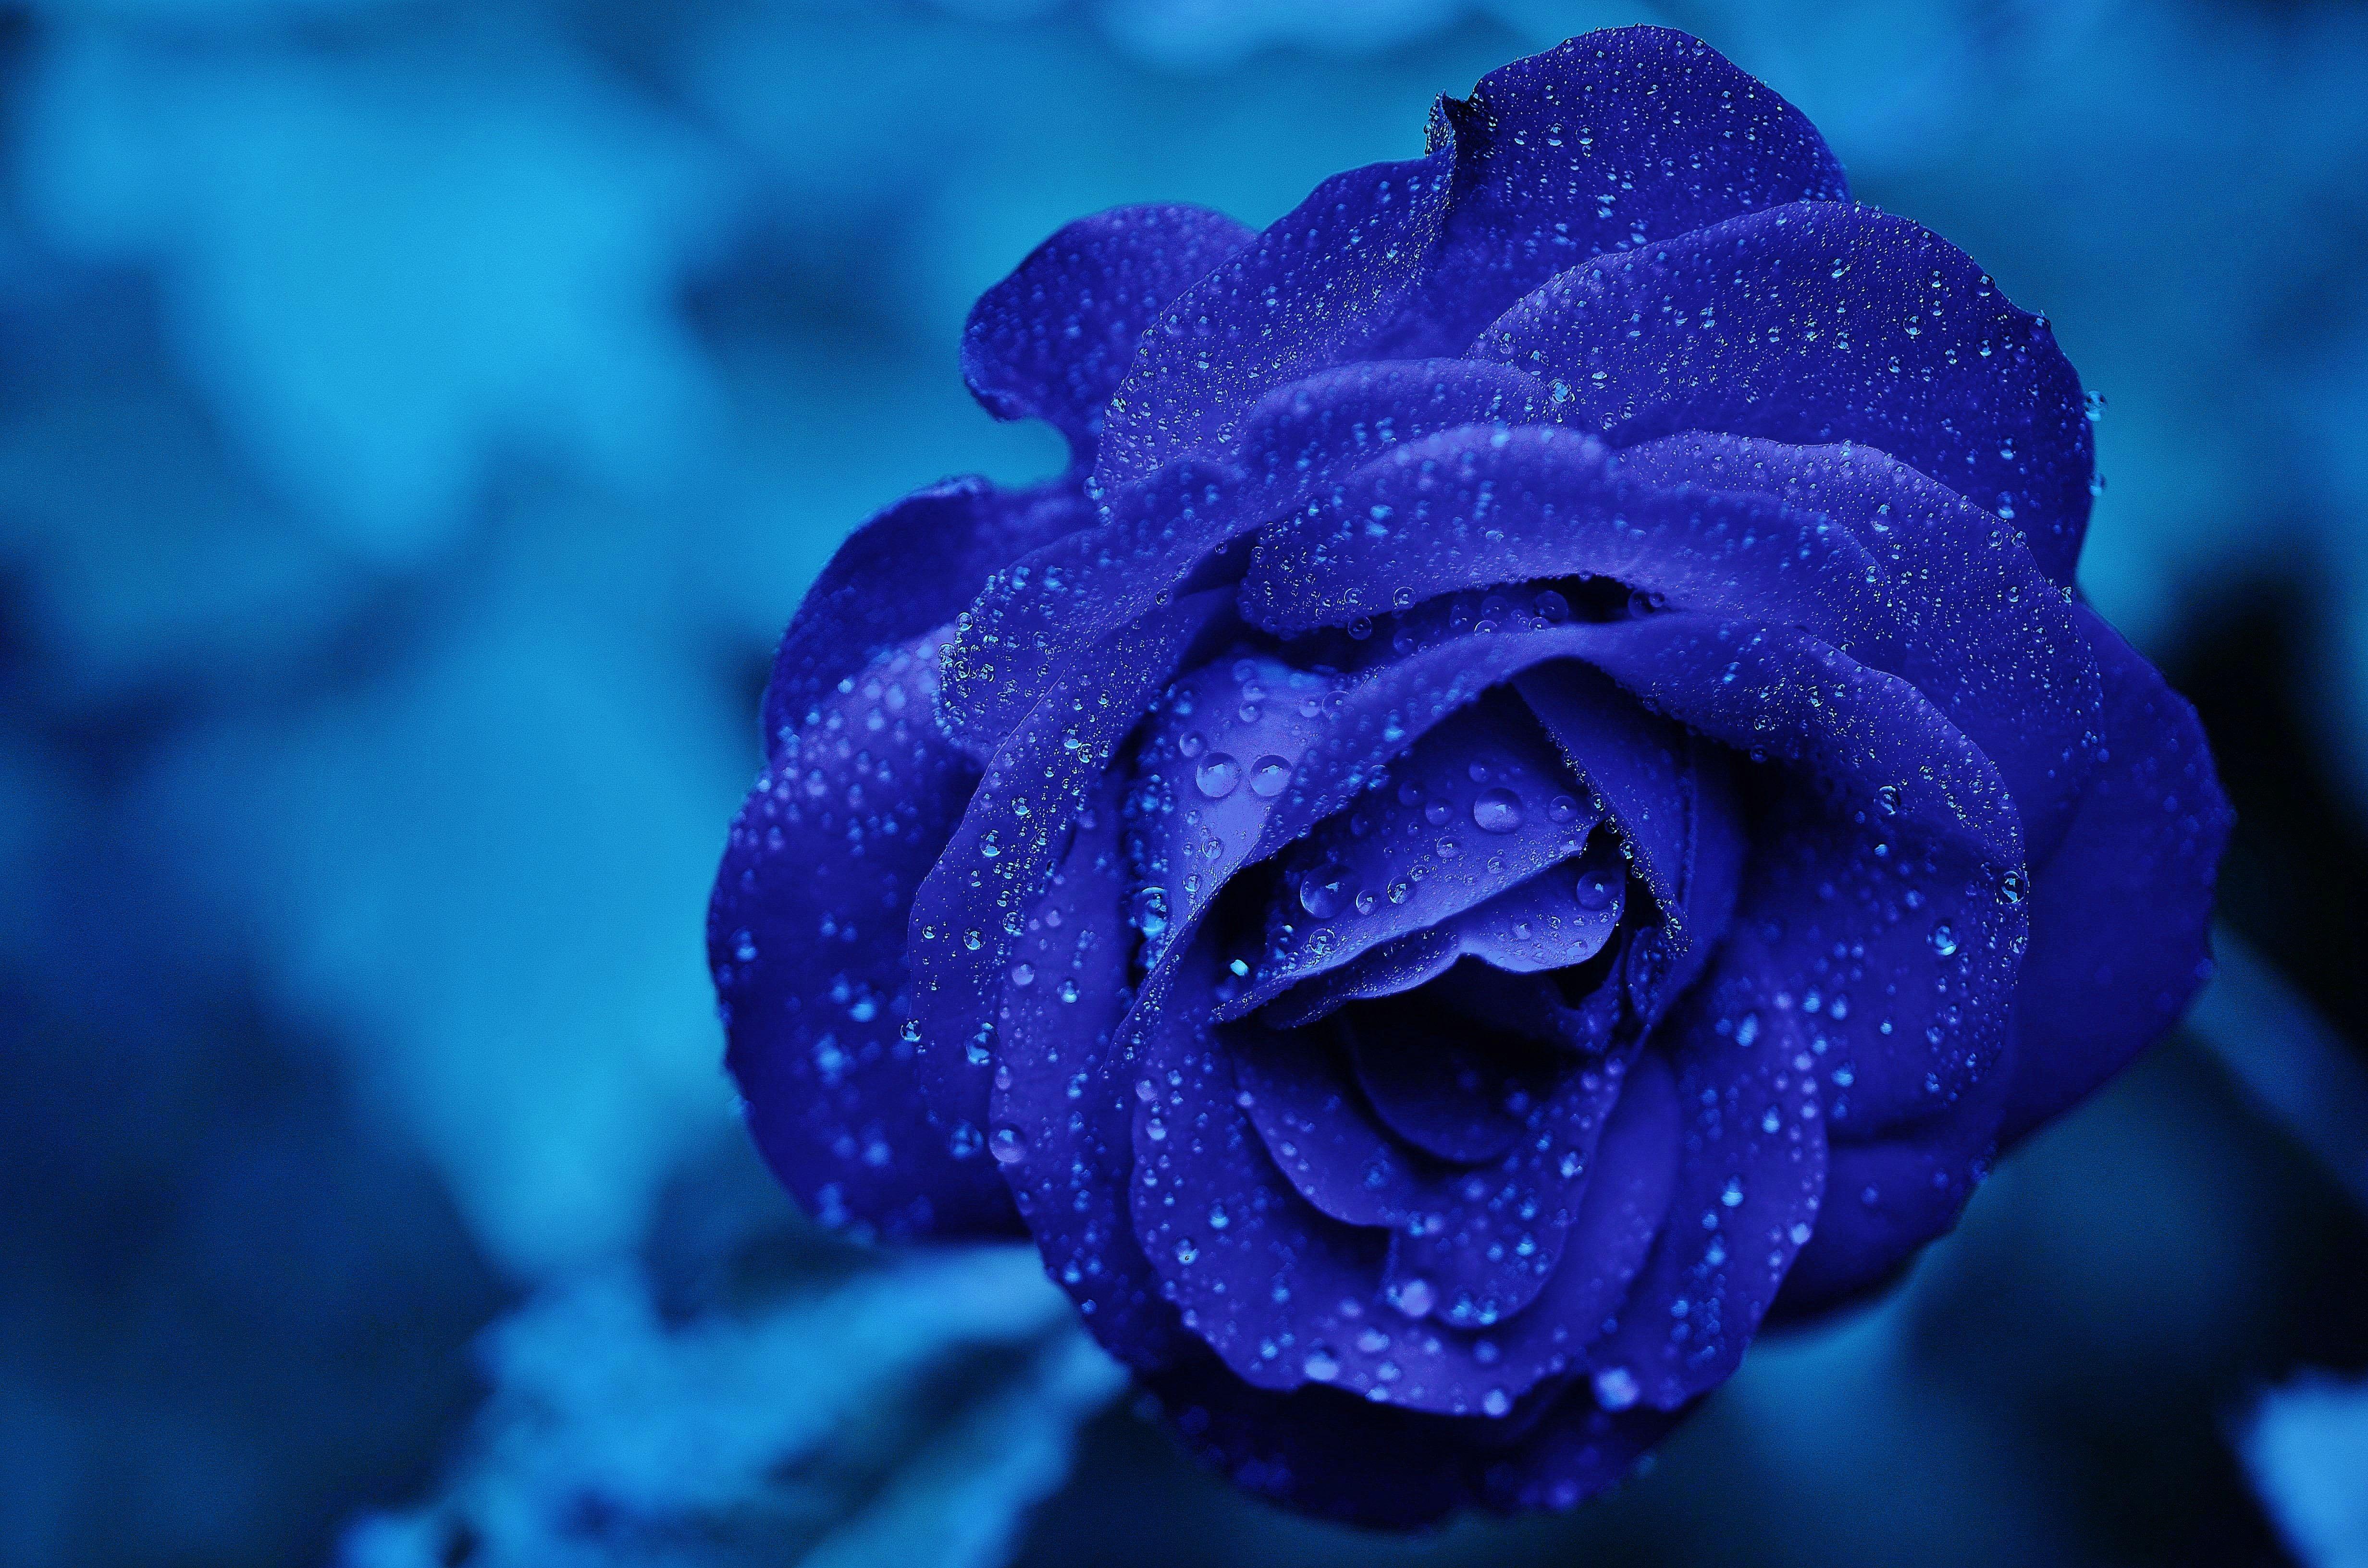 Blue Flower 4k 5k, HD Flowers, 4k Wallpaper, Image, Background, Photo and Picture